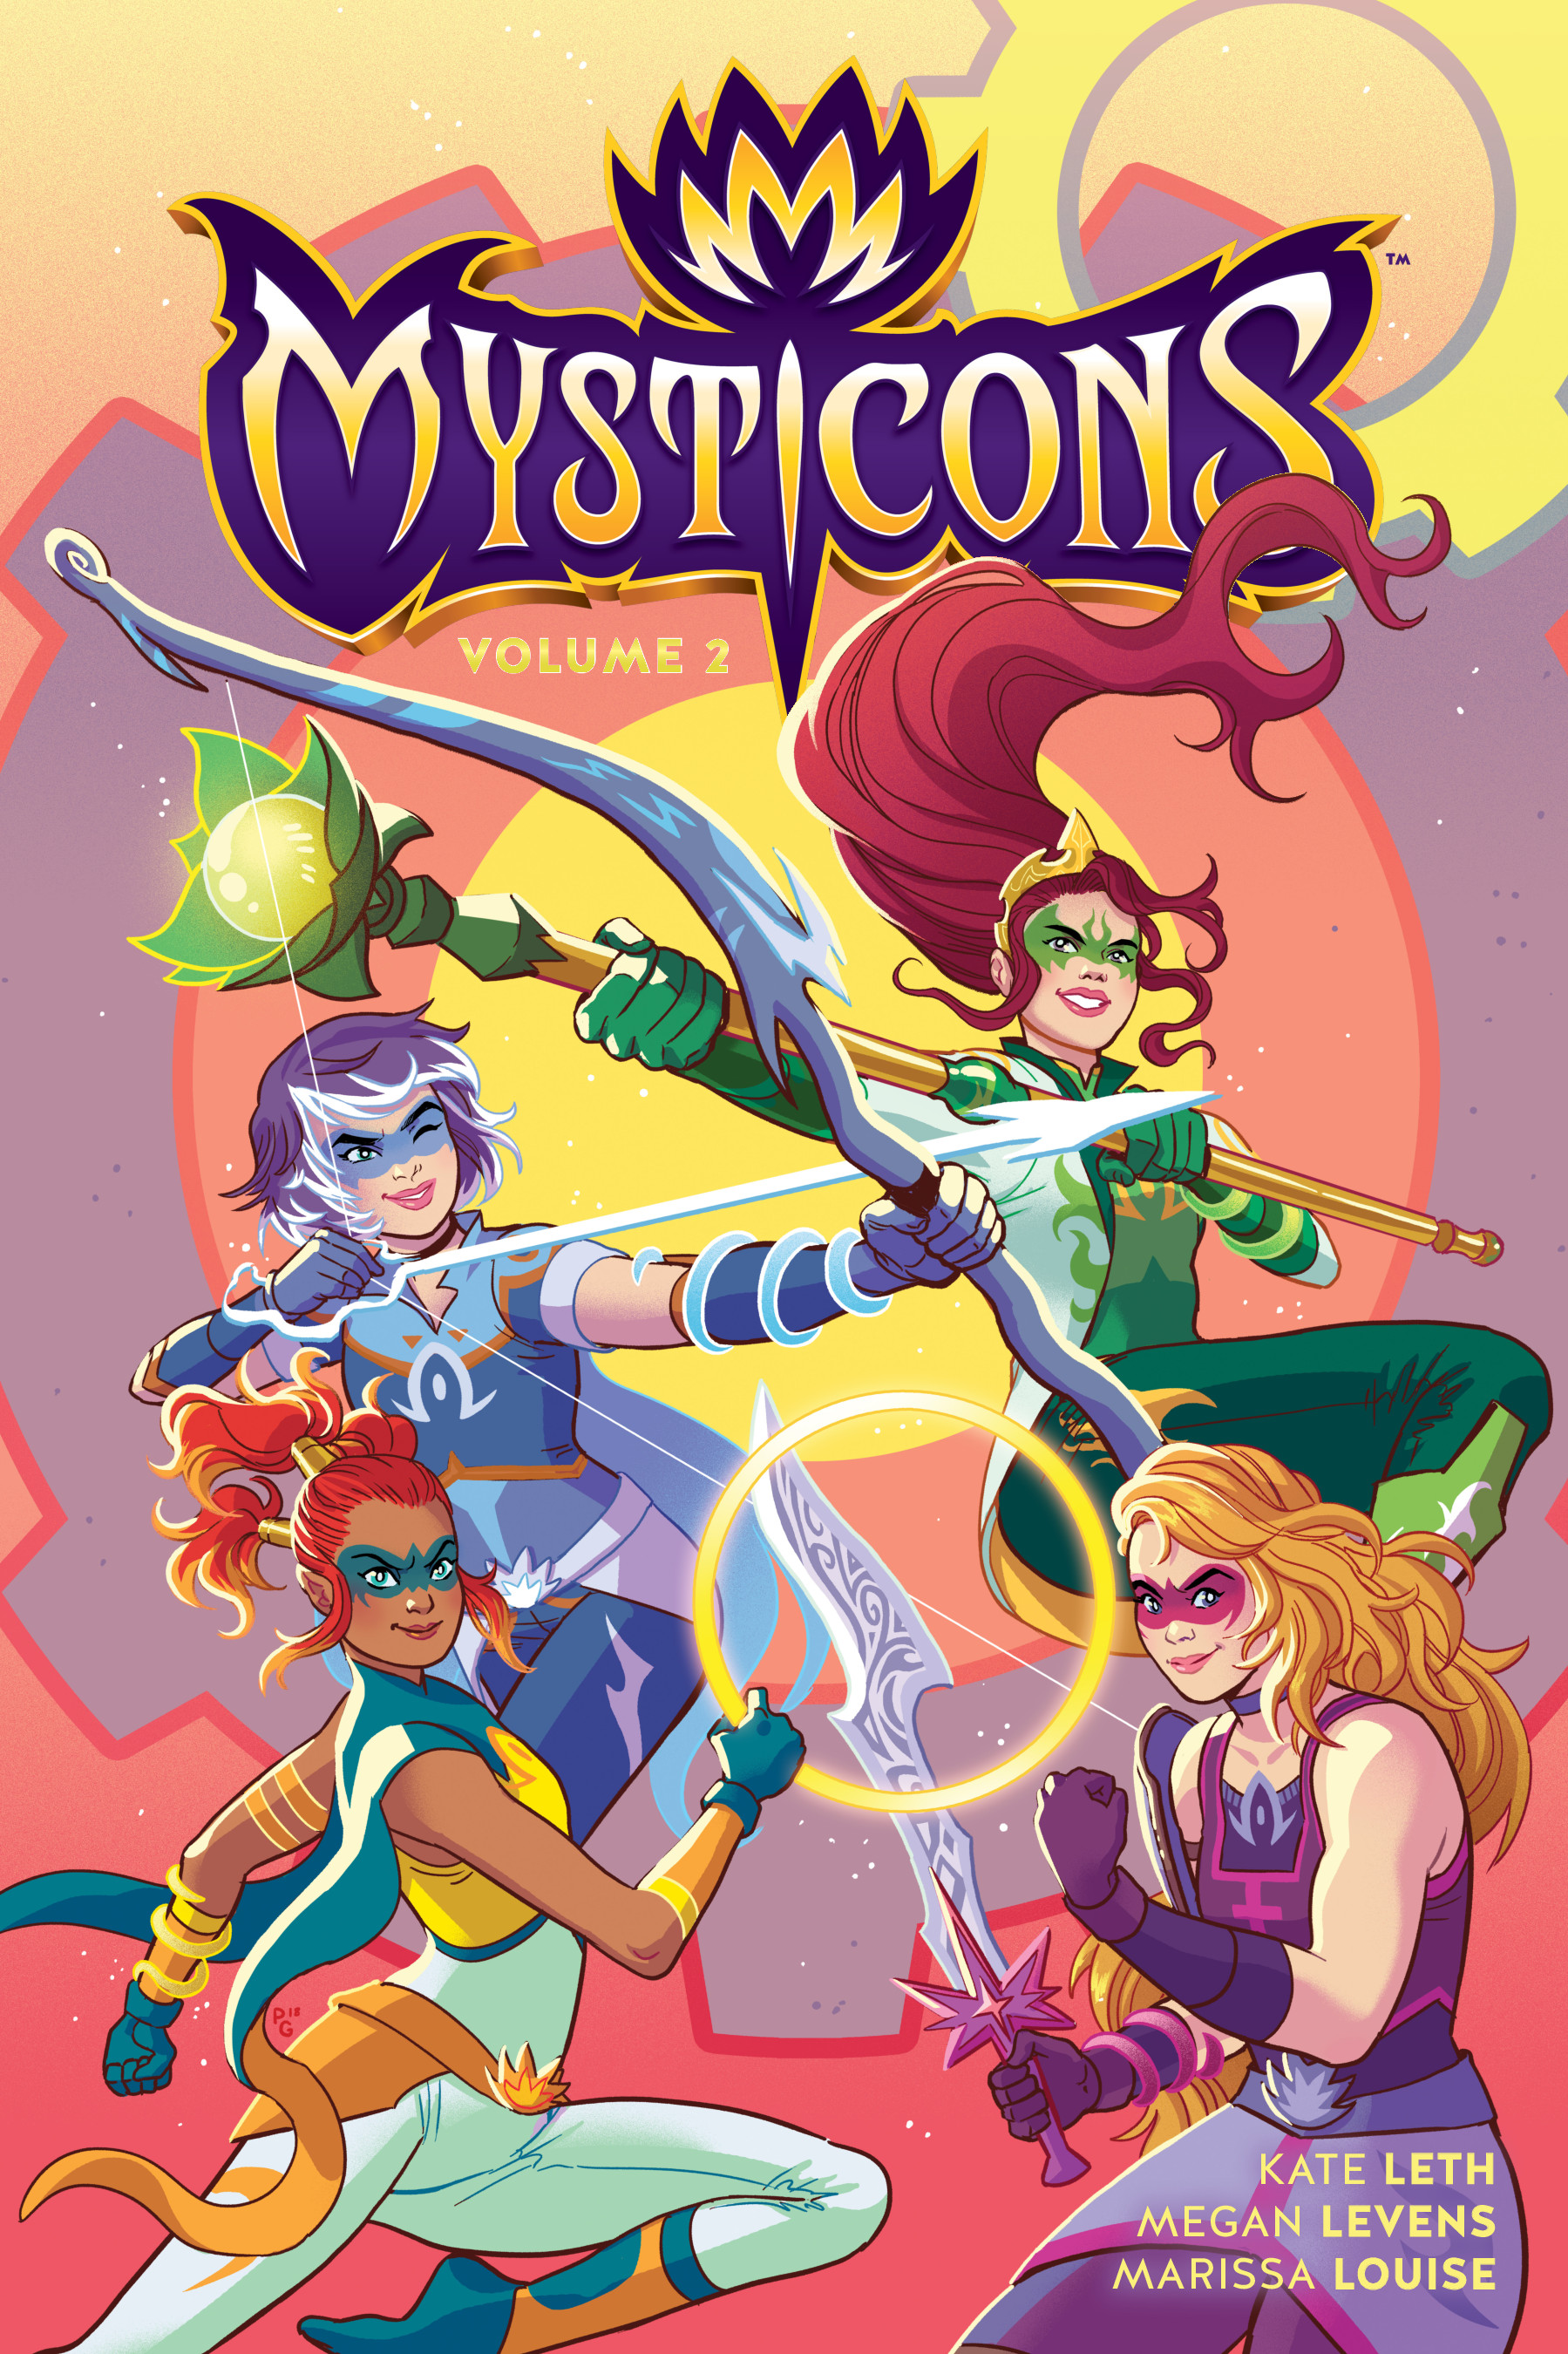 Read online Mysticons comic -  Issue # TPB 2 - 1